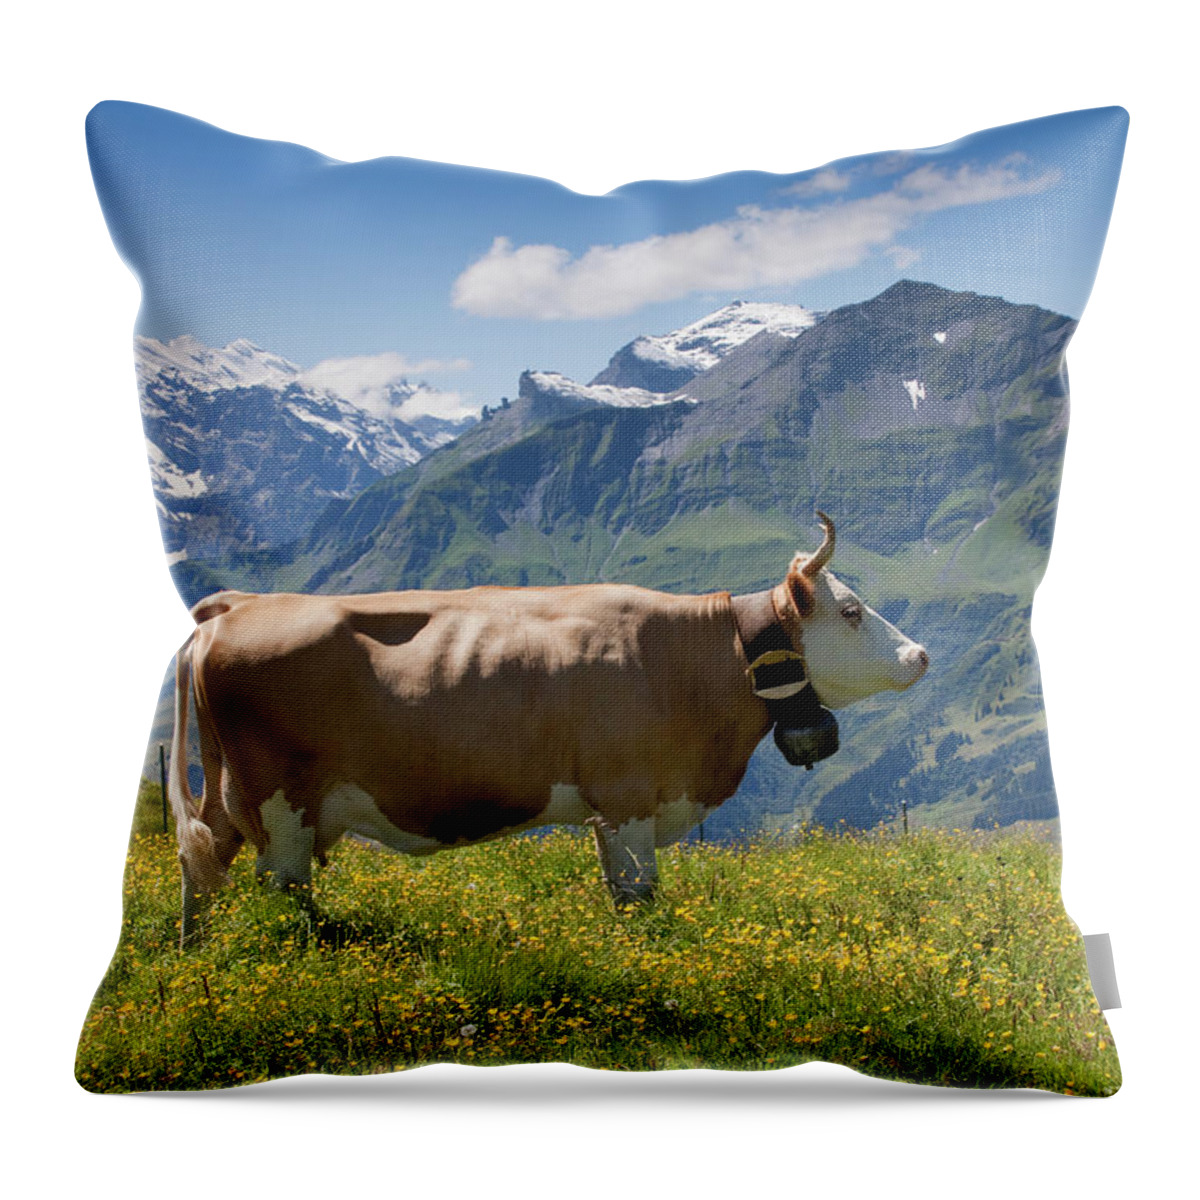 Grass Throw Pillow featuring the photograph Cow In The Swiss Alps by Barbara Pinter Photography